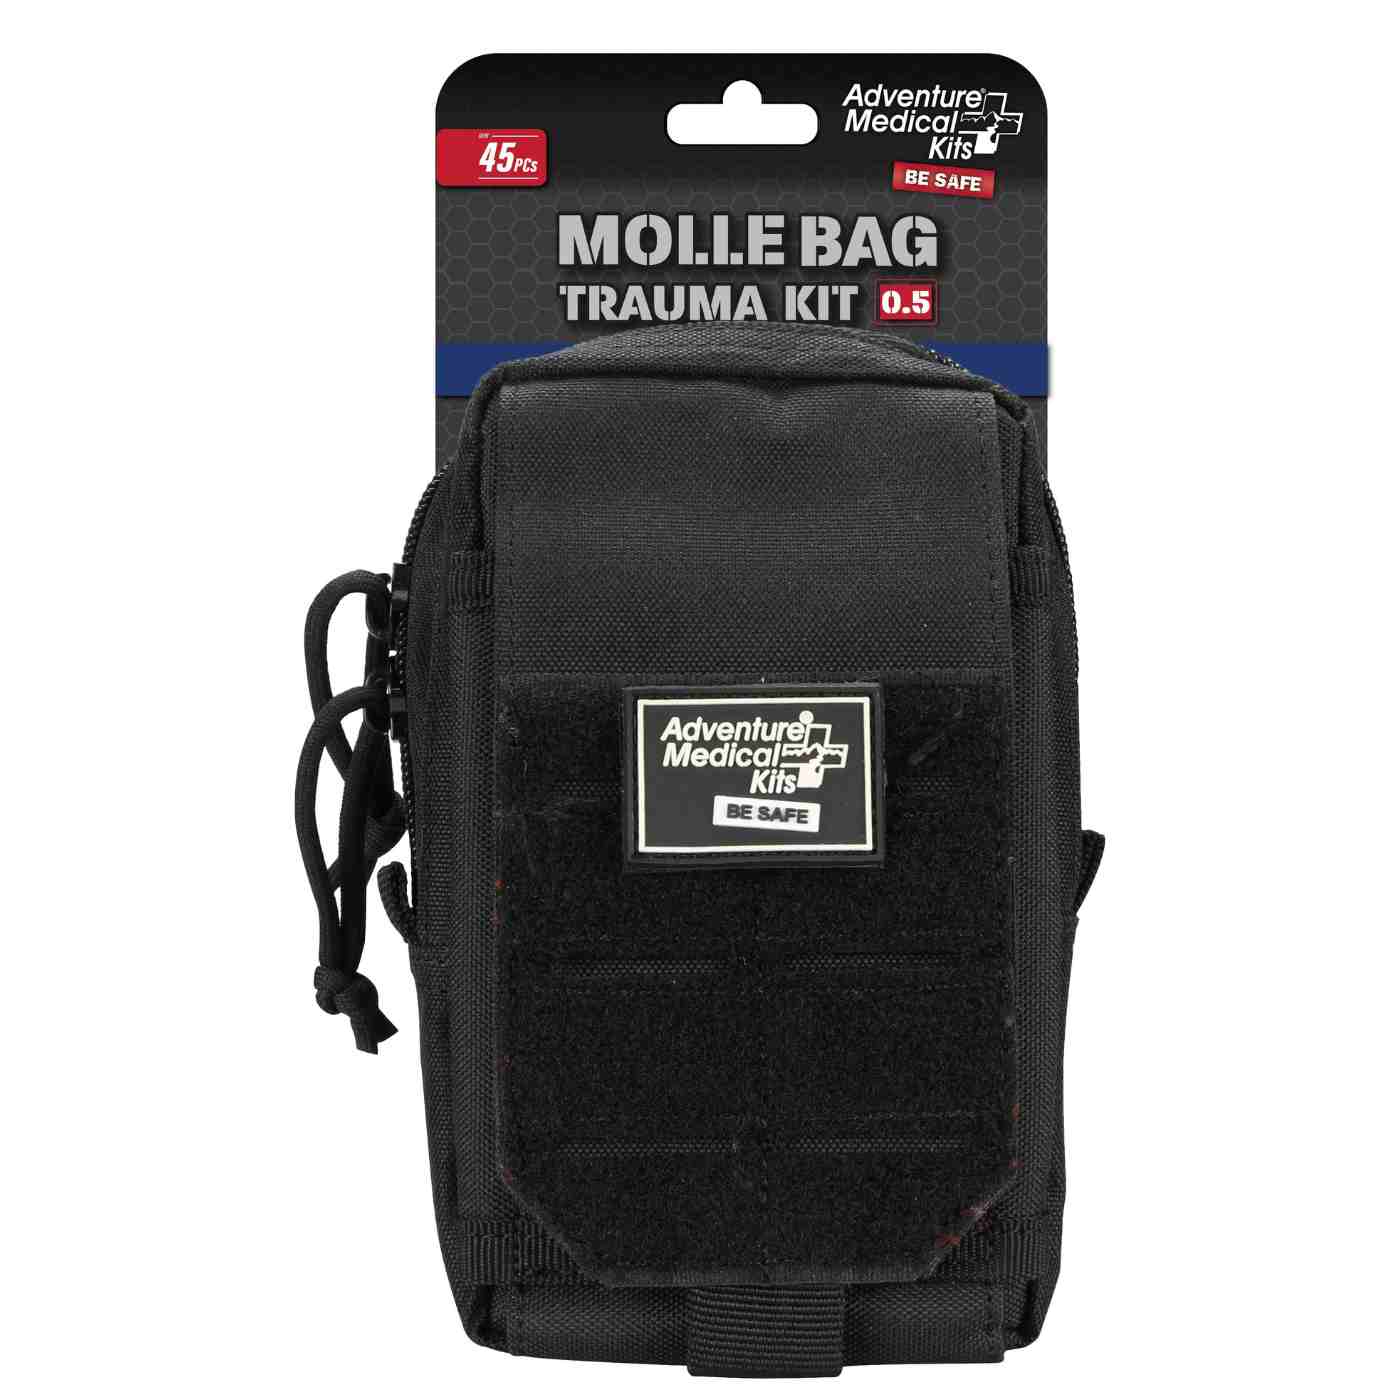 MOLLE Bag Trauma Kit 0.5 - Black front in packaging